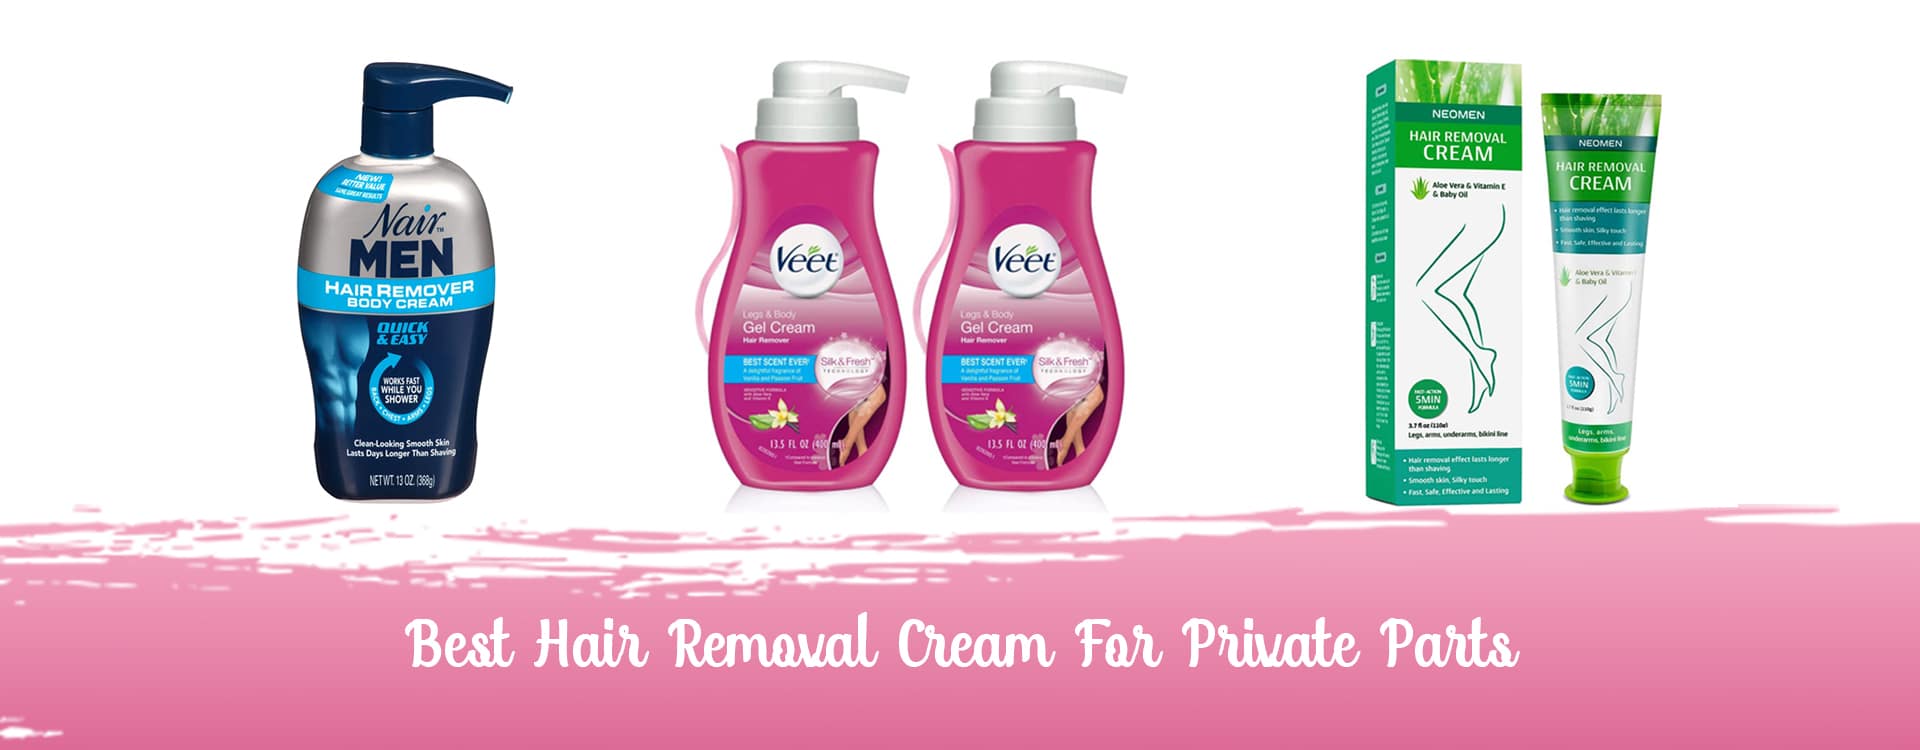 best hair removal cream for private parts feature